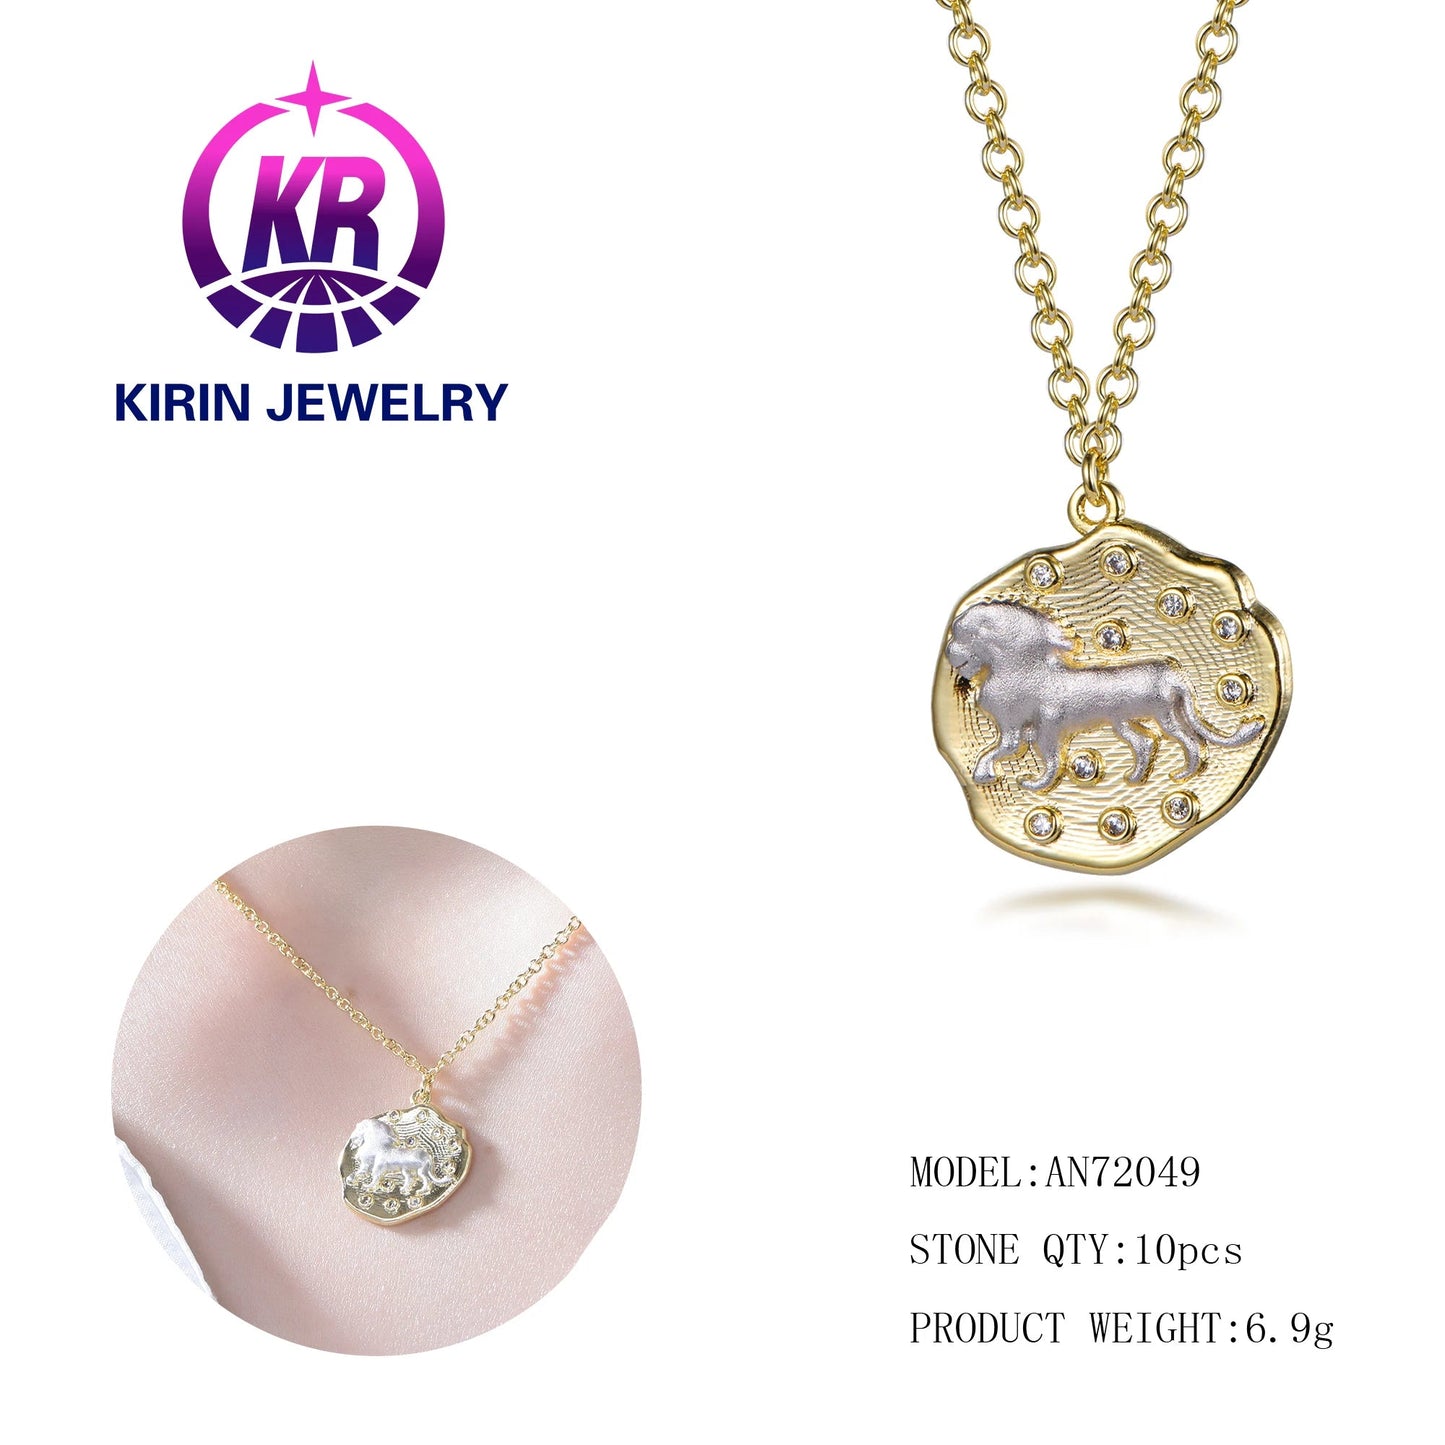 No Fade charms for necklace 14k gold filled pendant Leo Pendant coin pendant fashion jewelry Kirin Jewelry